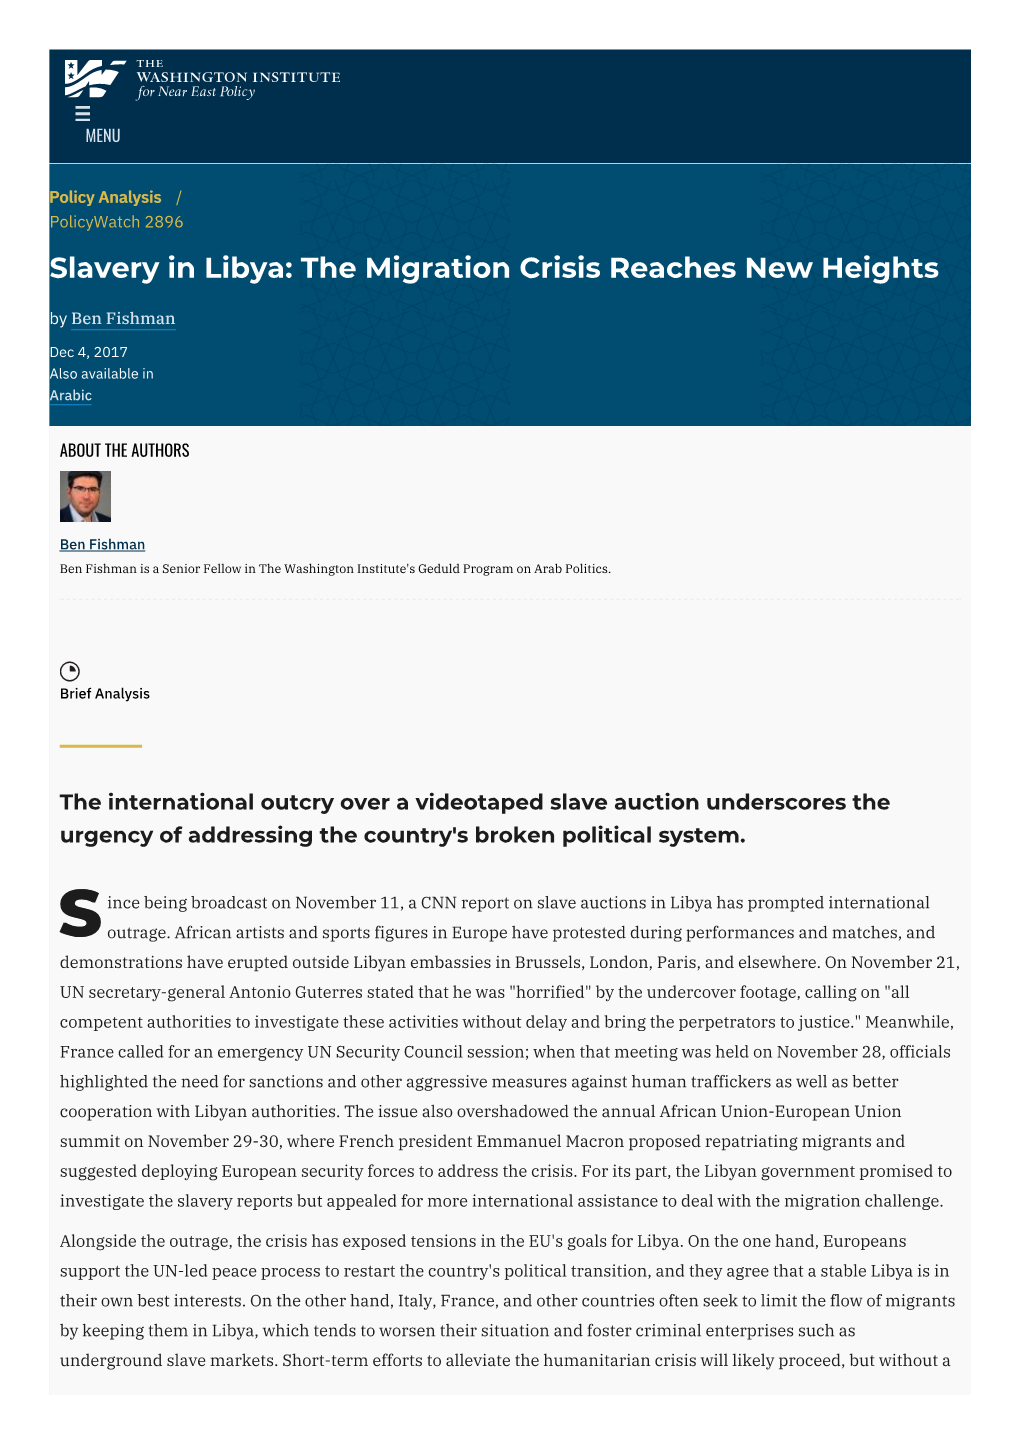 Slavery in Libya: the Migration Crisis Reaches New Heights | the Washington Institute